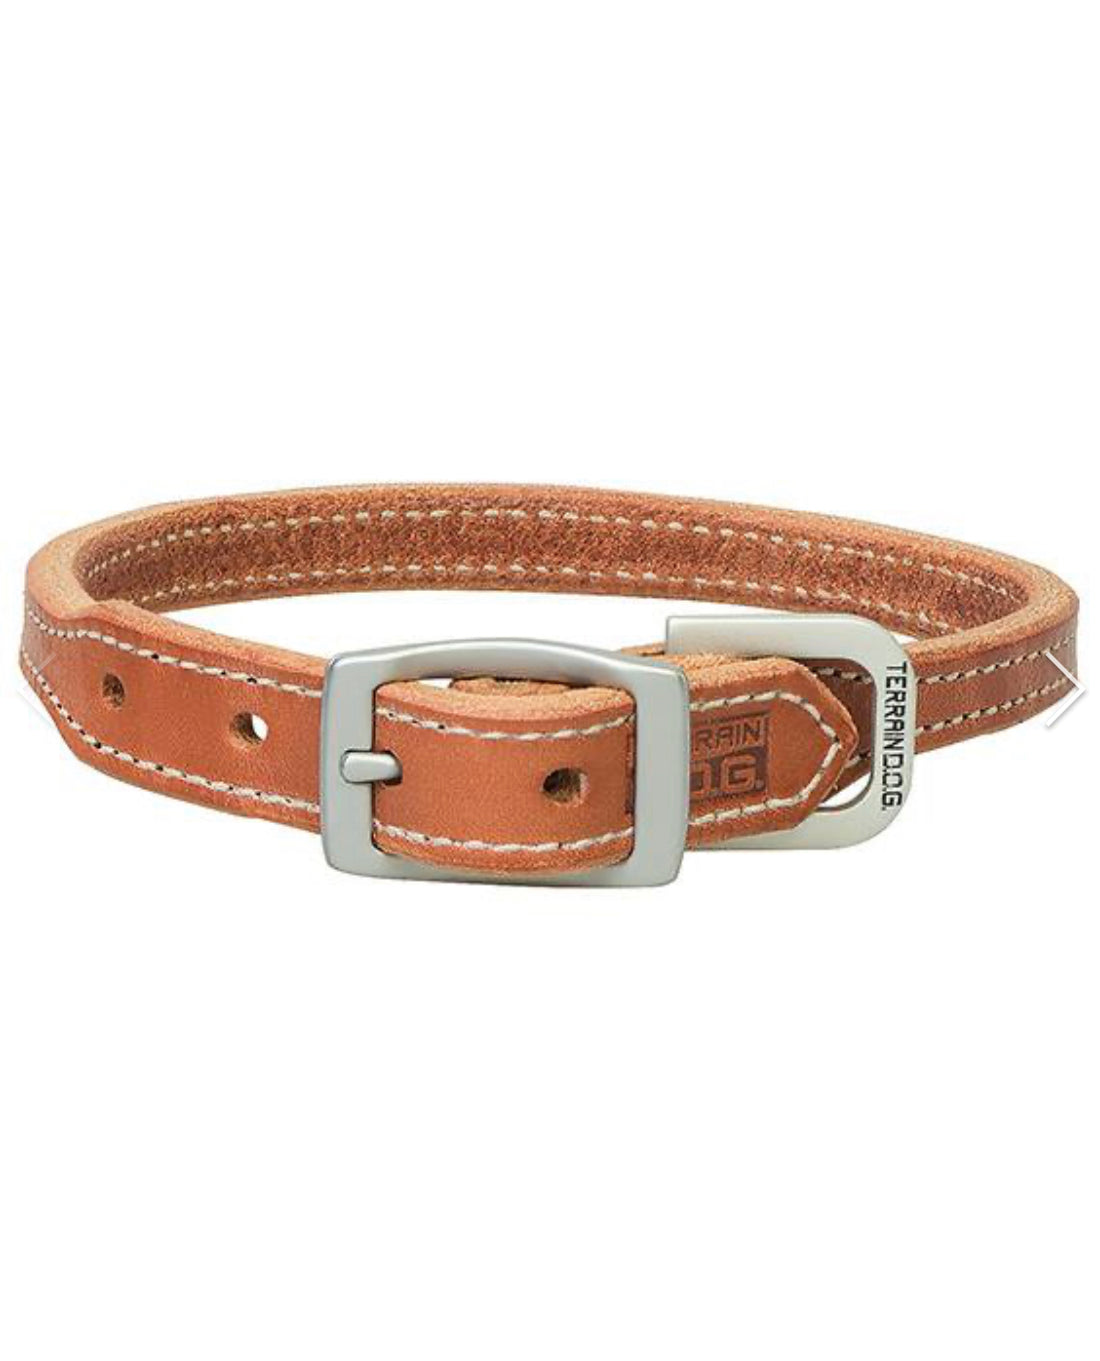 Buttered Harness Leather Hybrid Collar - Tan